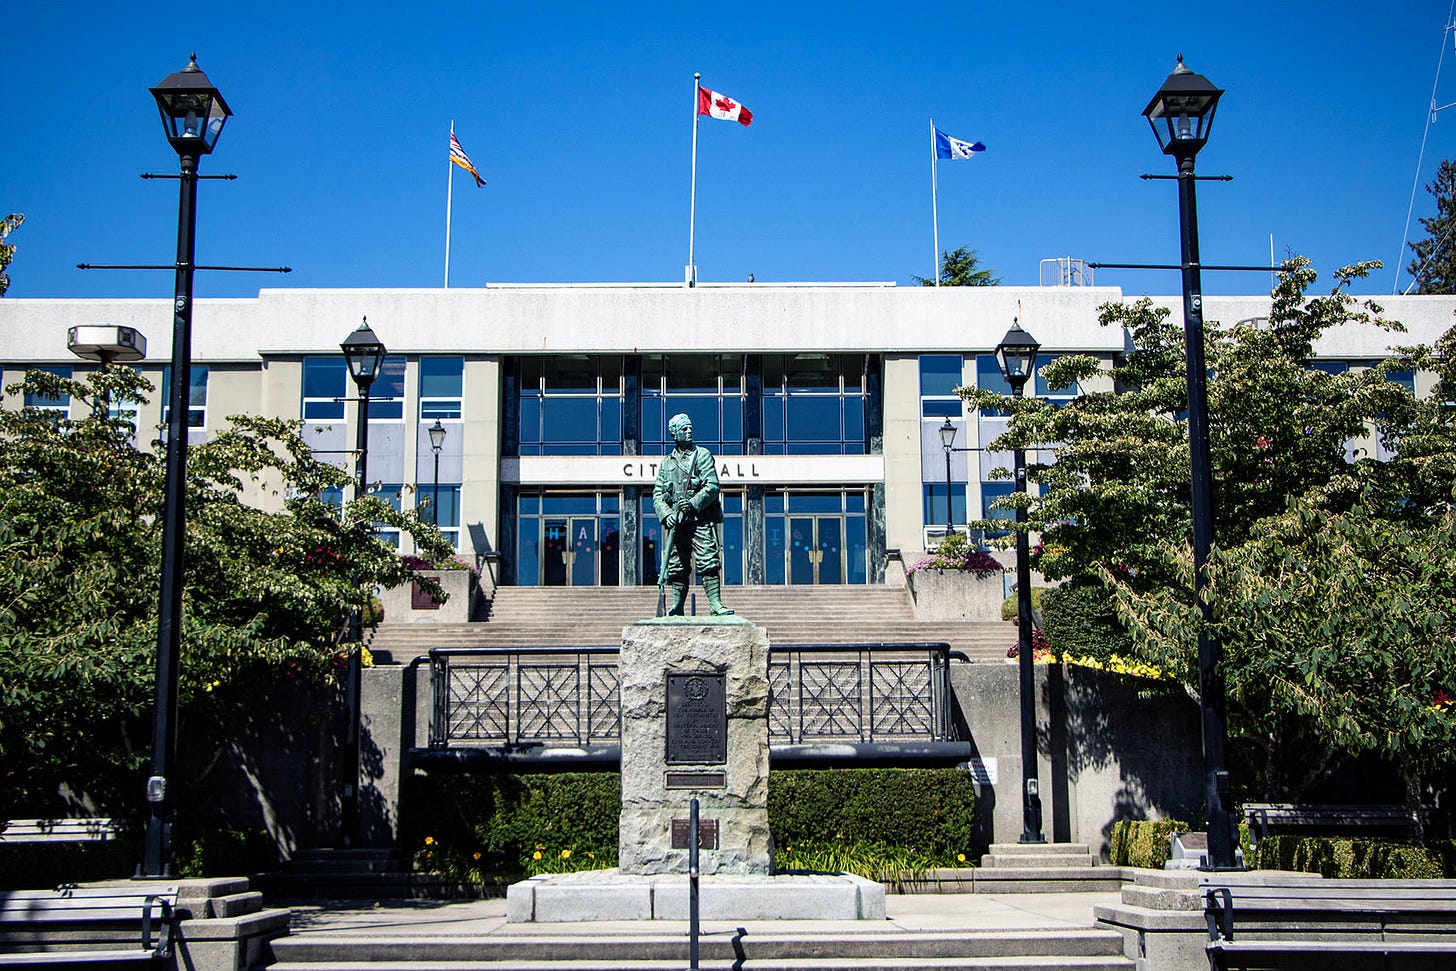 New Westminster City Hall is in the background, with the words "city hall" obscured somewhat by a statue in the foreground, about a storey below. the photo is taken from a plaza where the statue stands, which is lush with trees and other plant life. atop city hall are three flags: canada's, BC's and i think the city's?